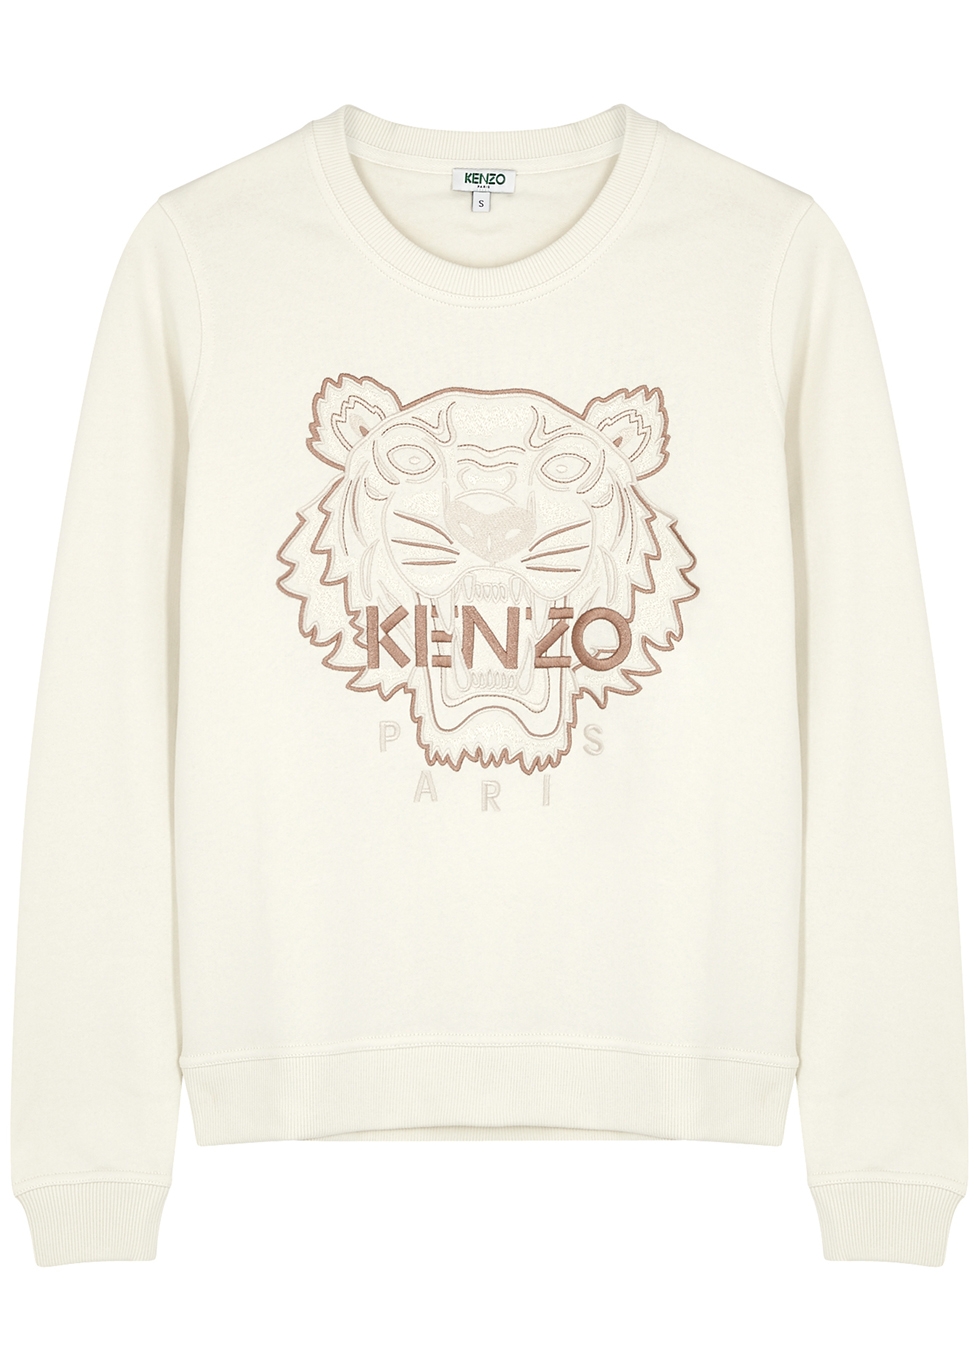 kenzo jumper white and gold